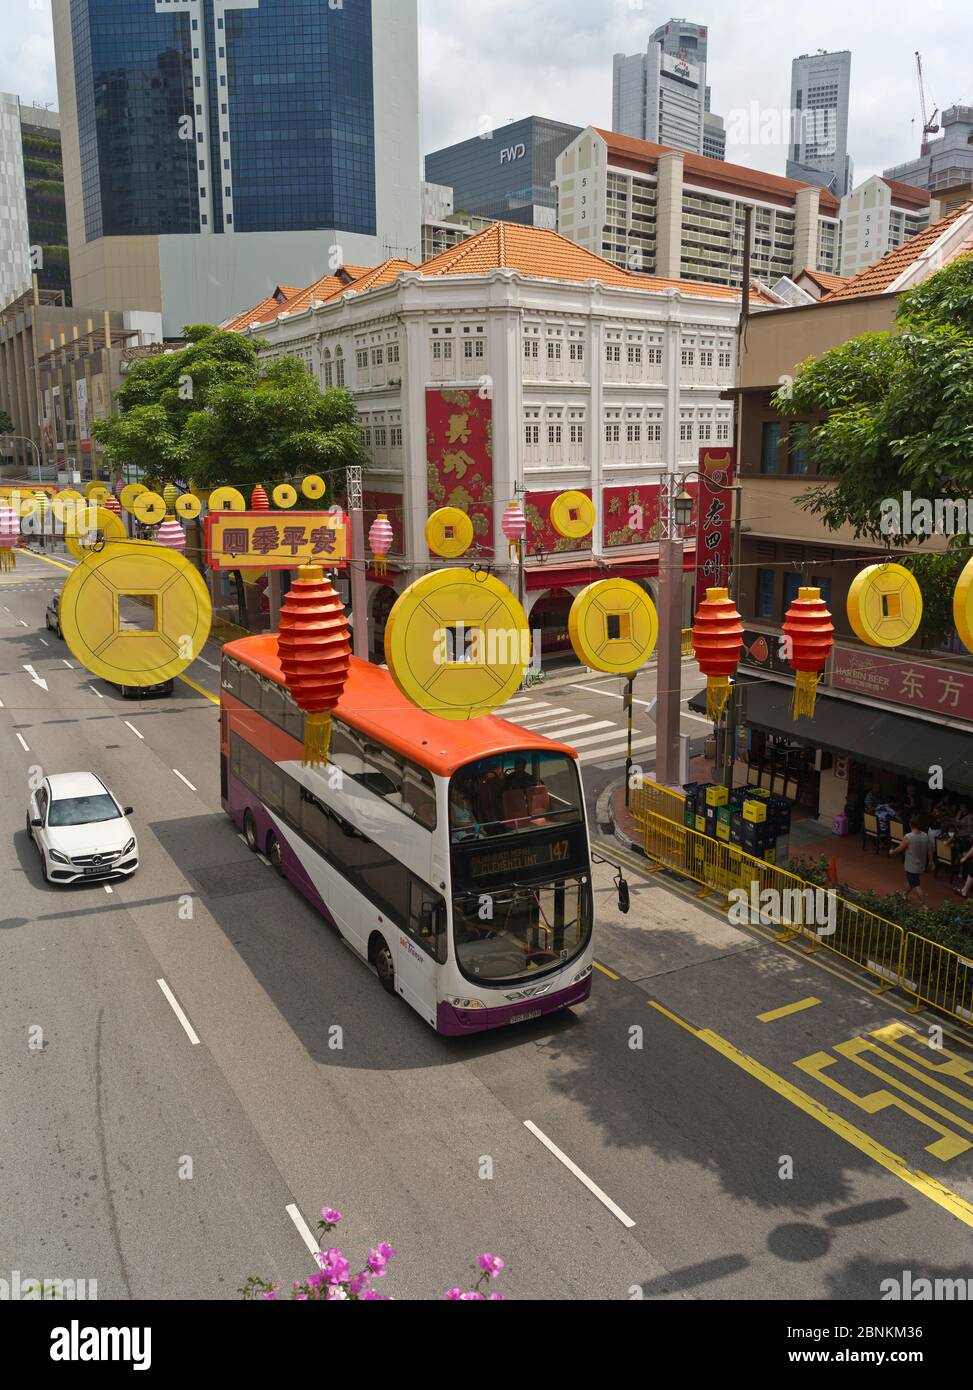 dh Chinese street CHINATOWN SINGAPORE New year decorations across city road double decker bus local buses Stock Photo